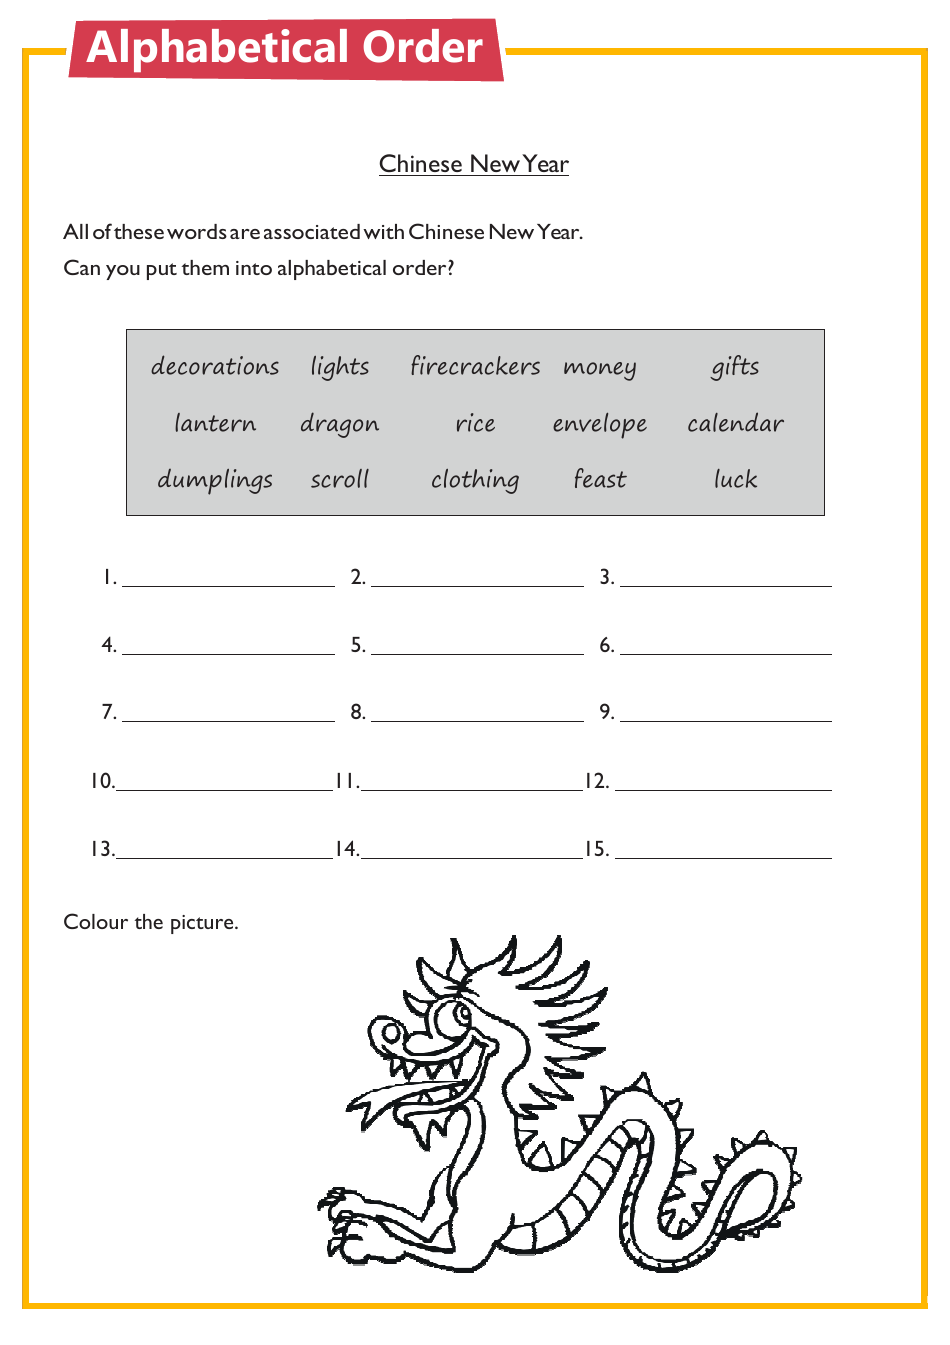 Chinese New Year Worksheet - Alphabetical Order preview